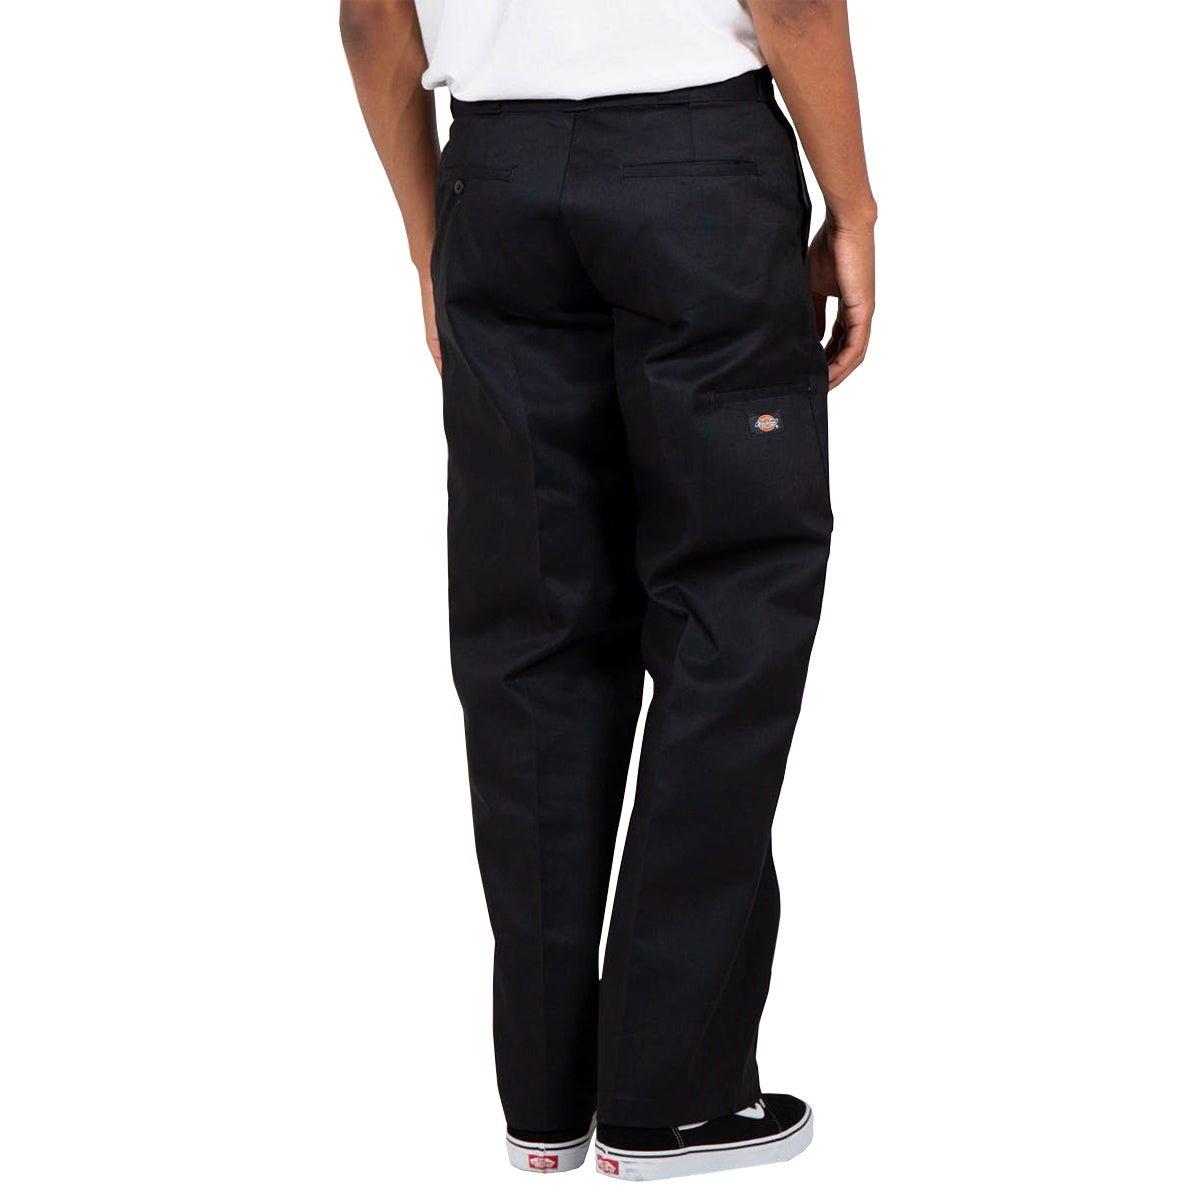 https://www.boardertown.co.nz/content/products/dickies-loose-fit-double-knee-workpant-black-alt2-af-85283.jpg